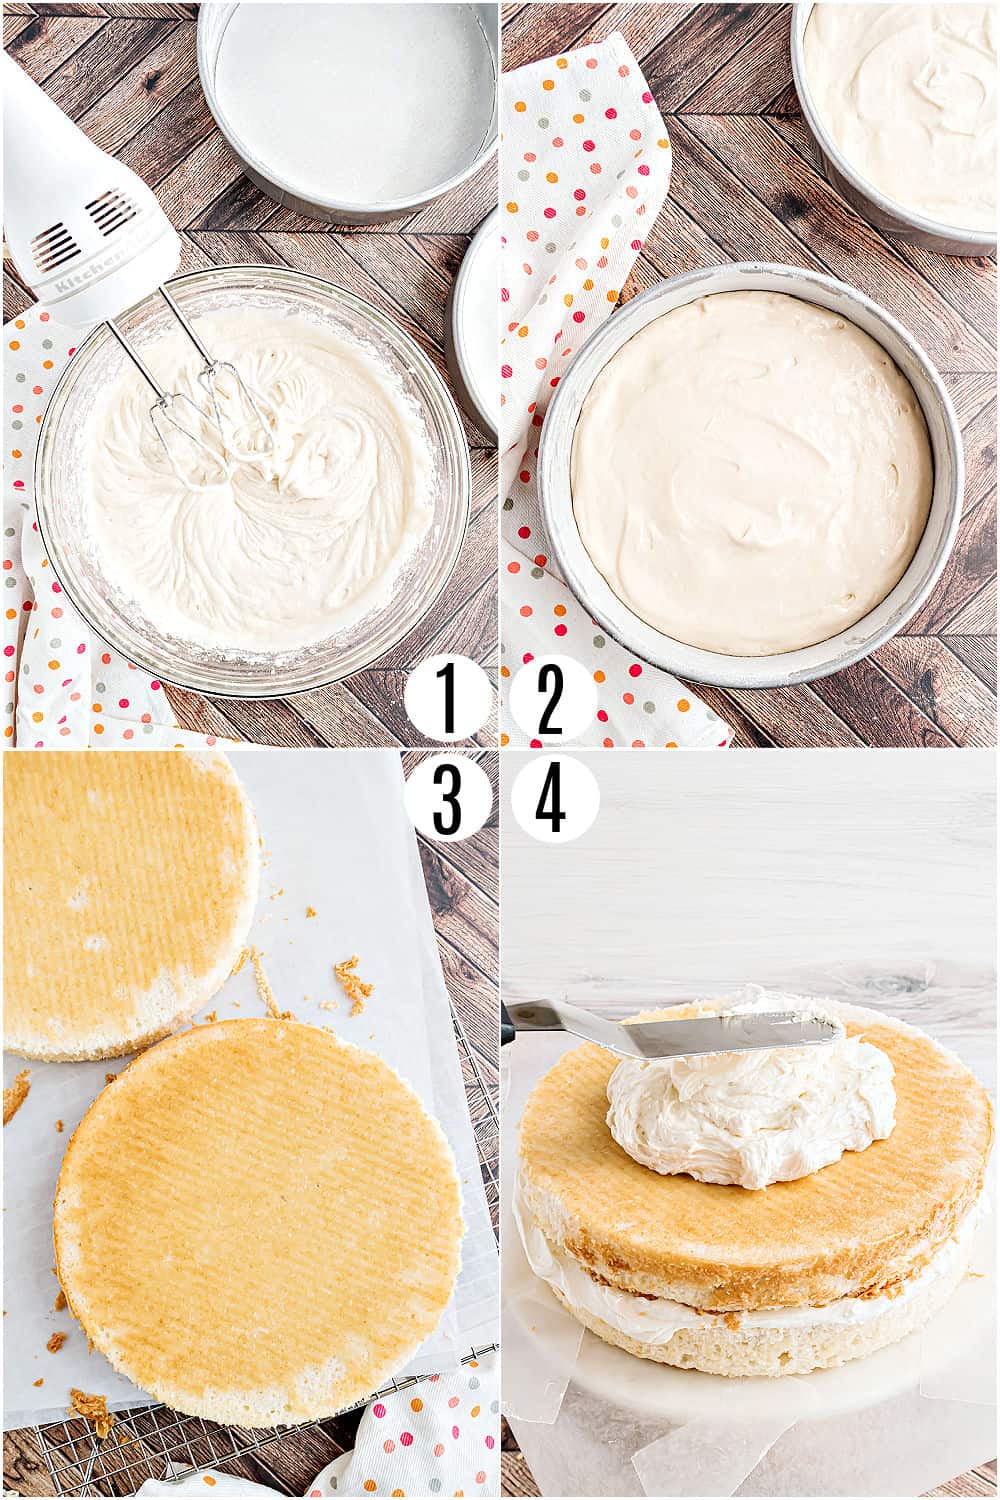 Step by step photos showing how to make white cake.